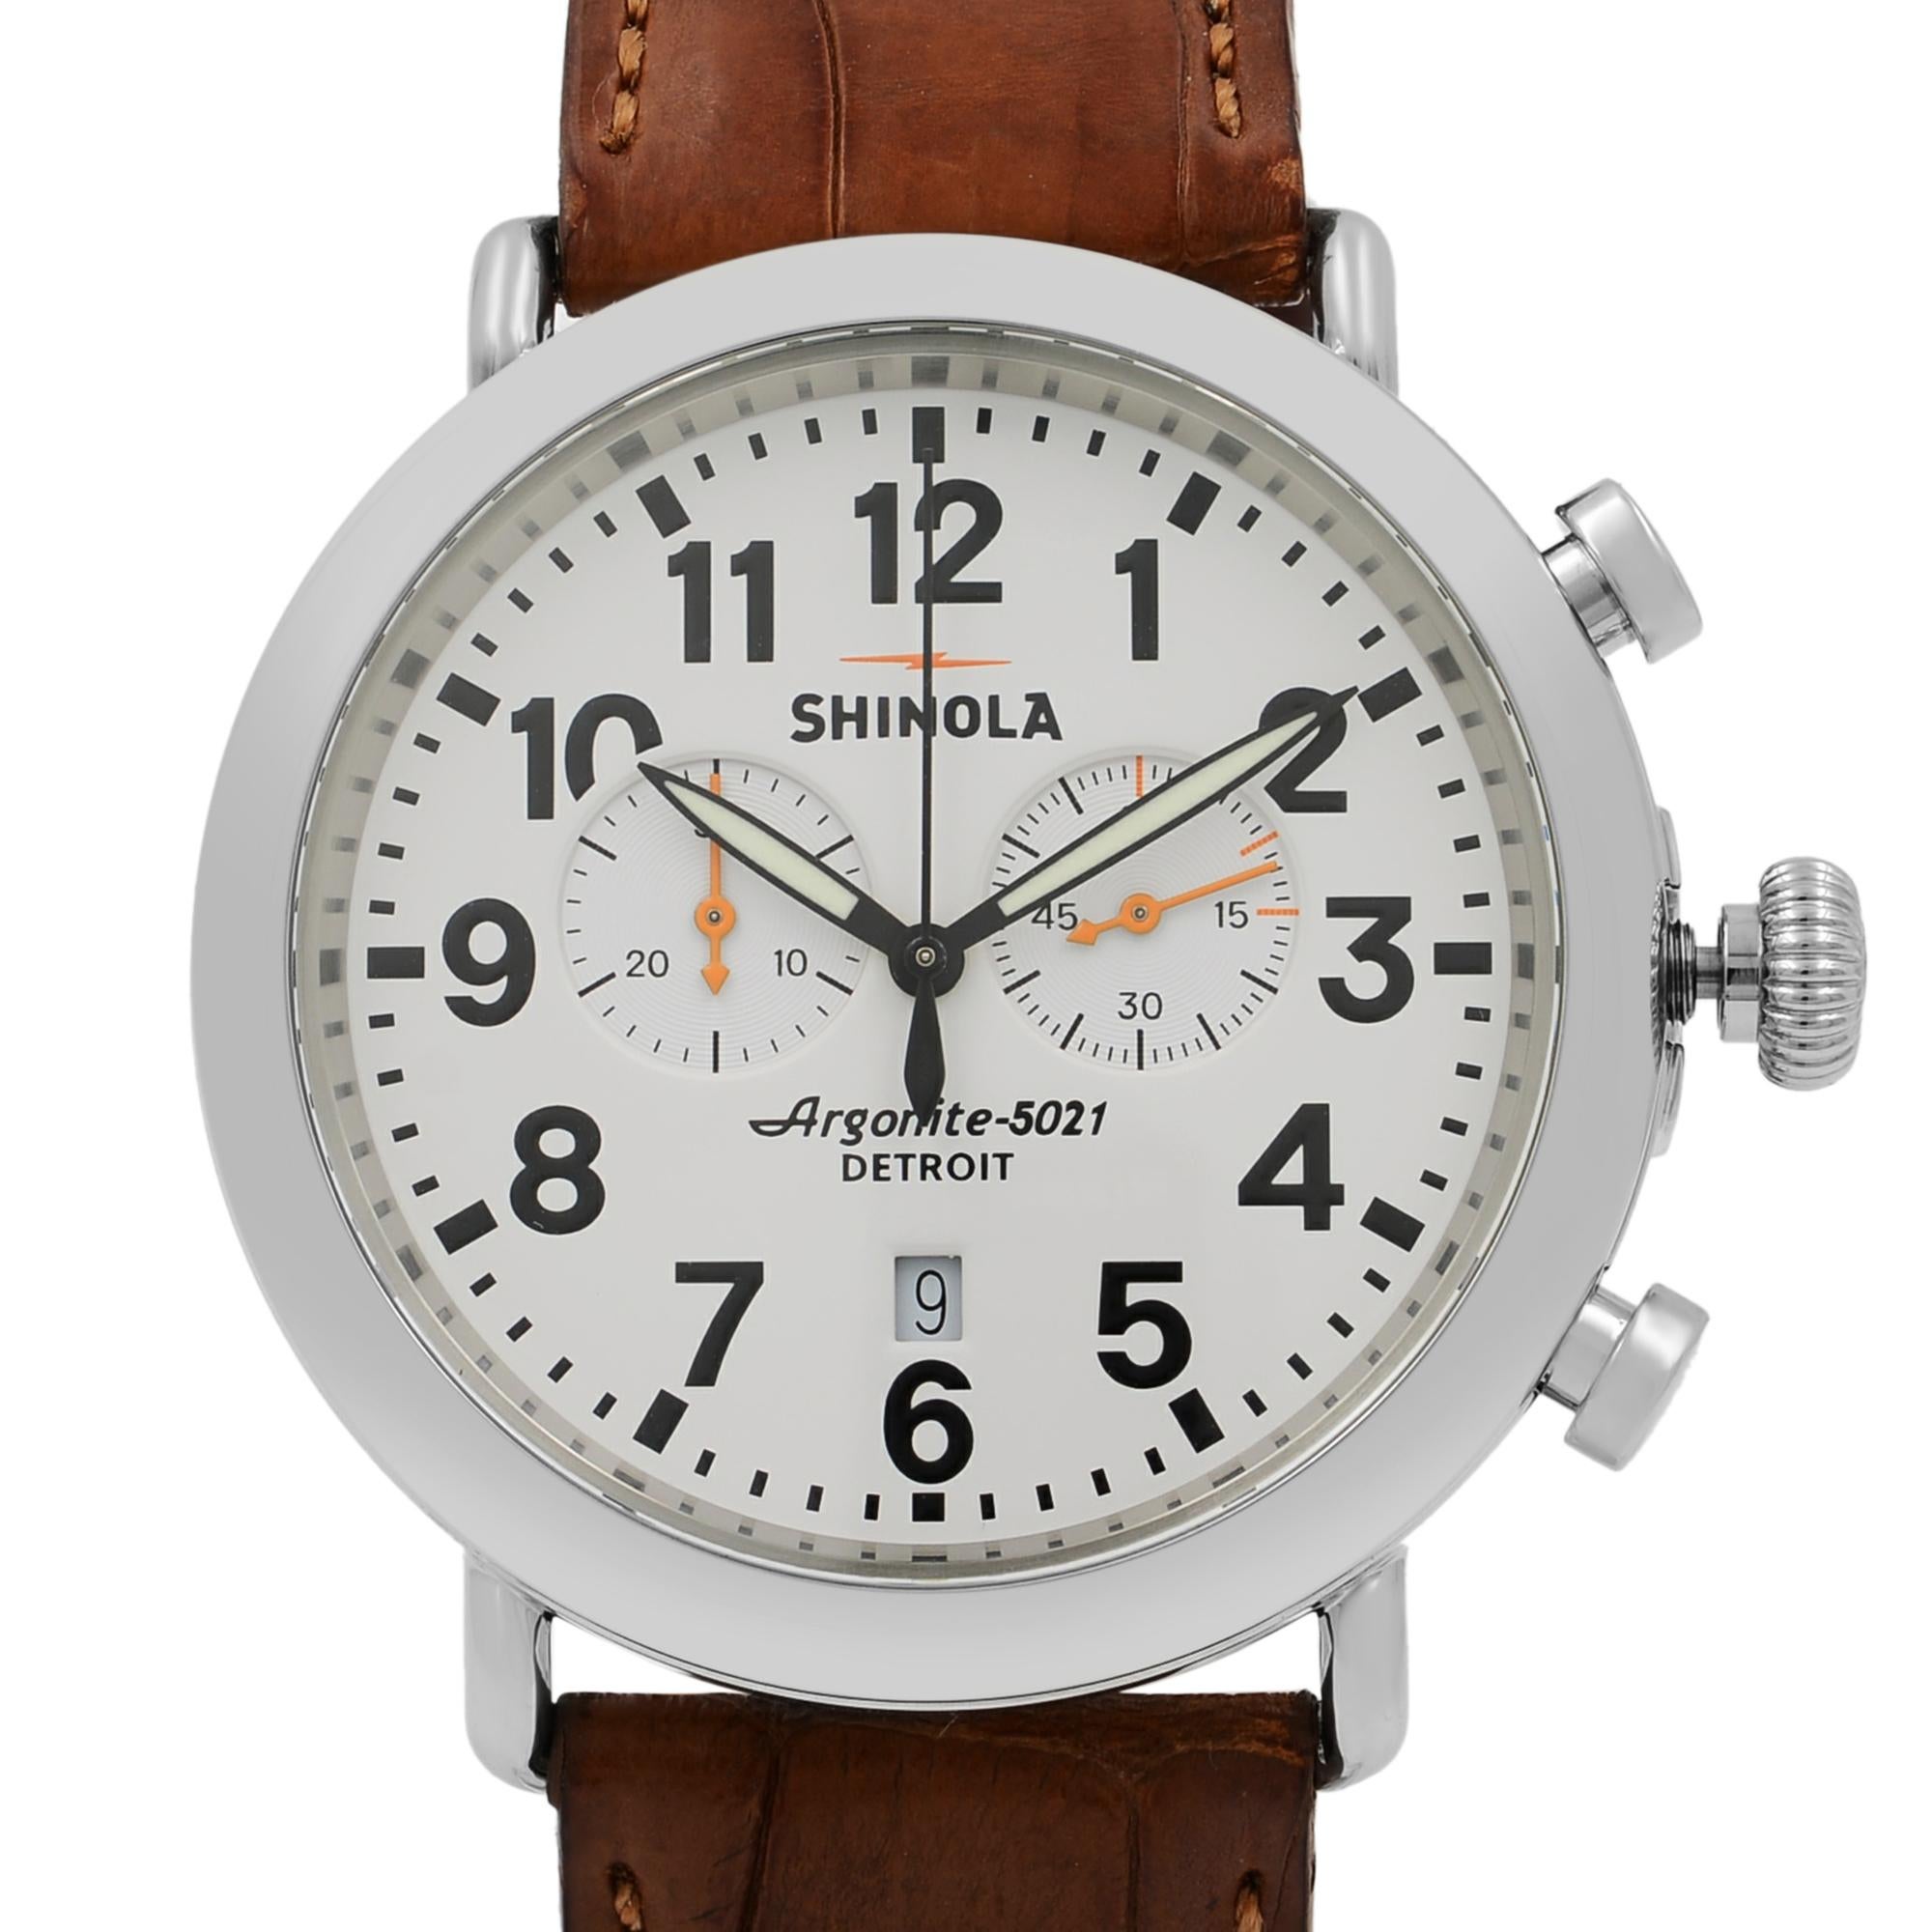 This pre-owned Shinola The Runwell 10000045 is a beautiful men's timepiece that is powered by quartz (battery) movement which is cased in a stainless steel case. It has a round shape face, chronograph, date indicator, small seconds subdial dial, and